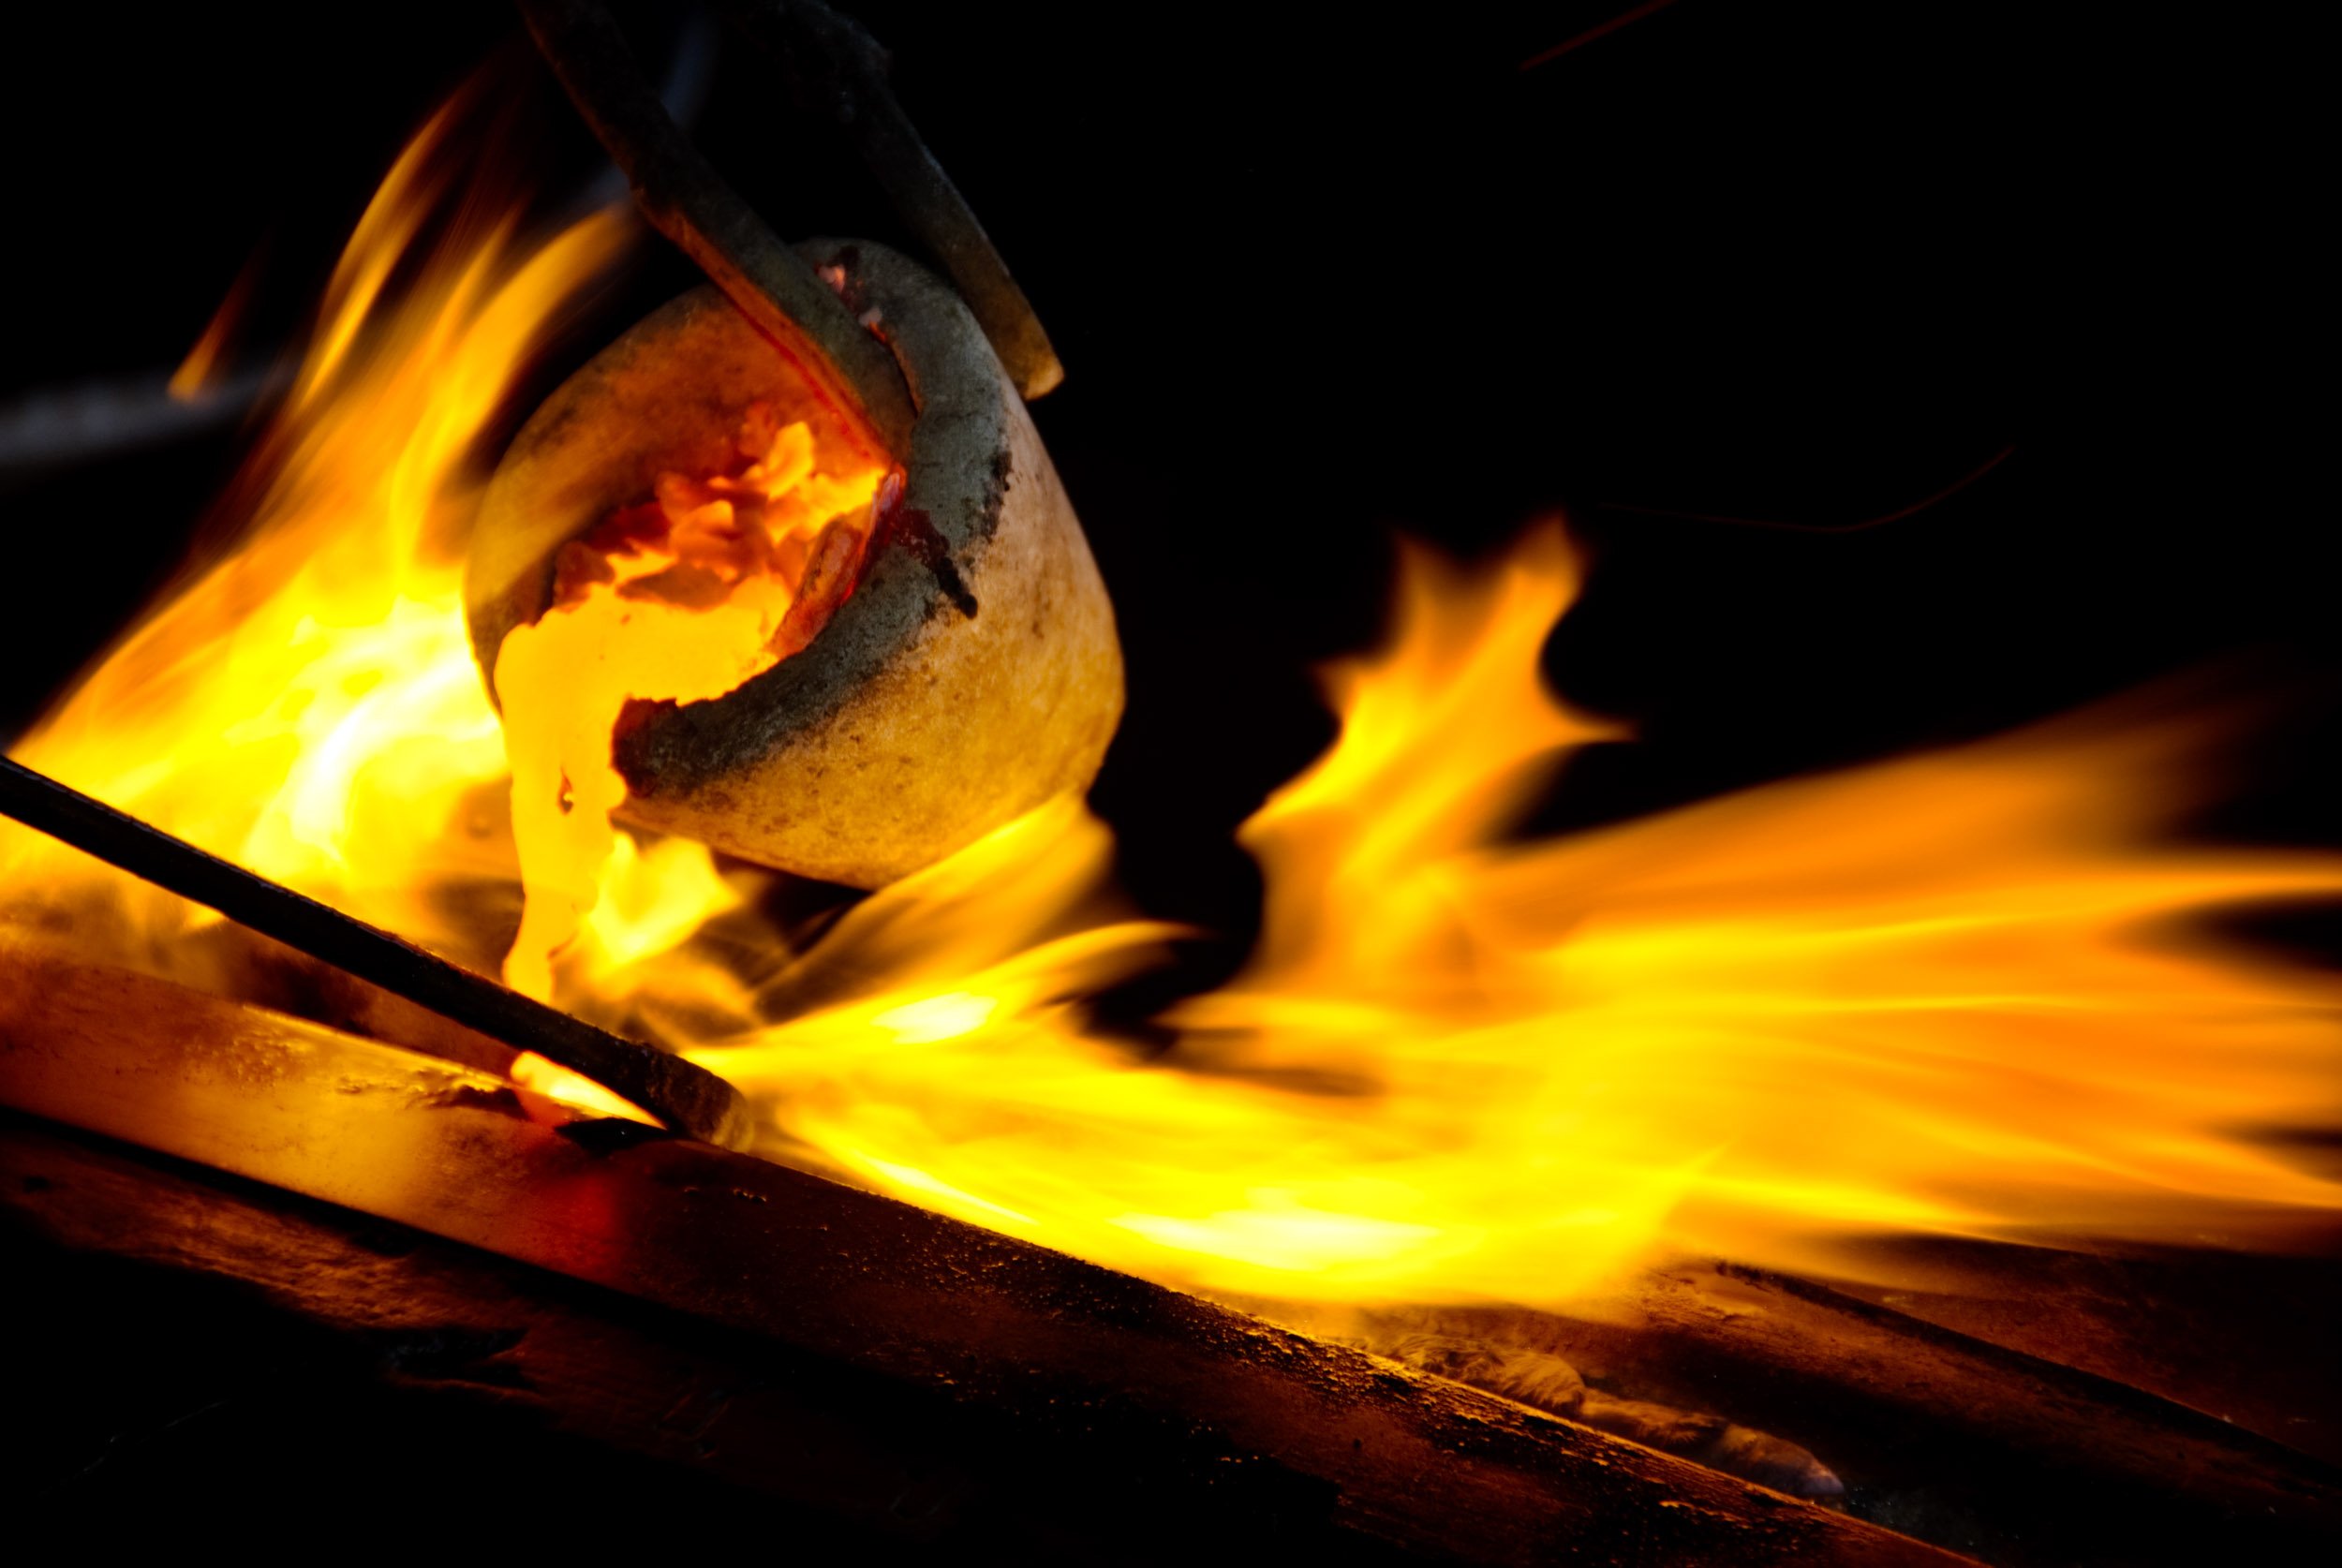 Small crucible pouring moulten bronze at a foundry. For Photography Mentorship Program